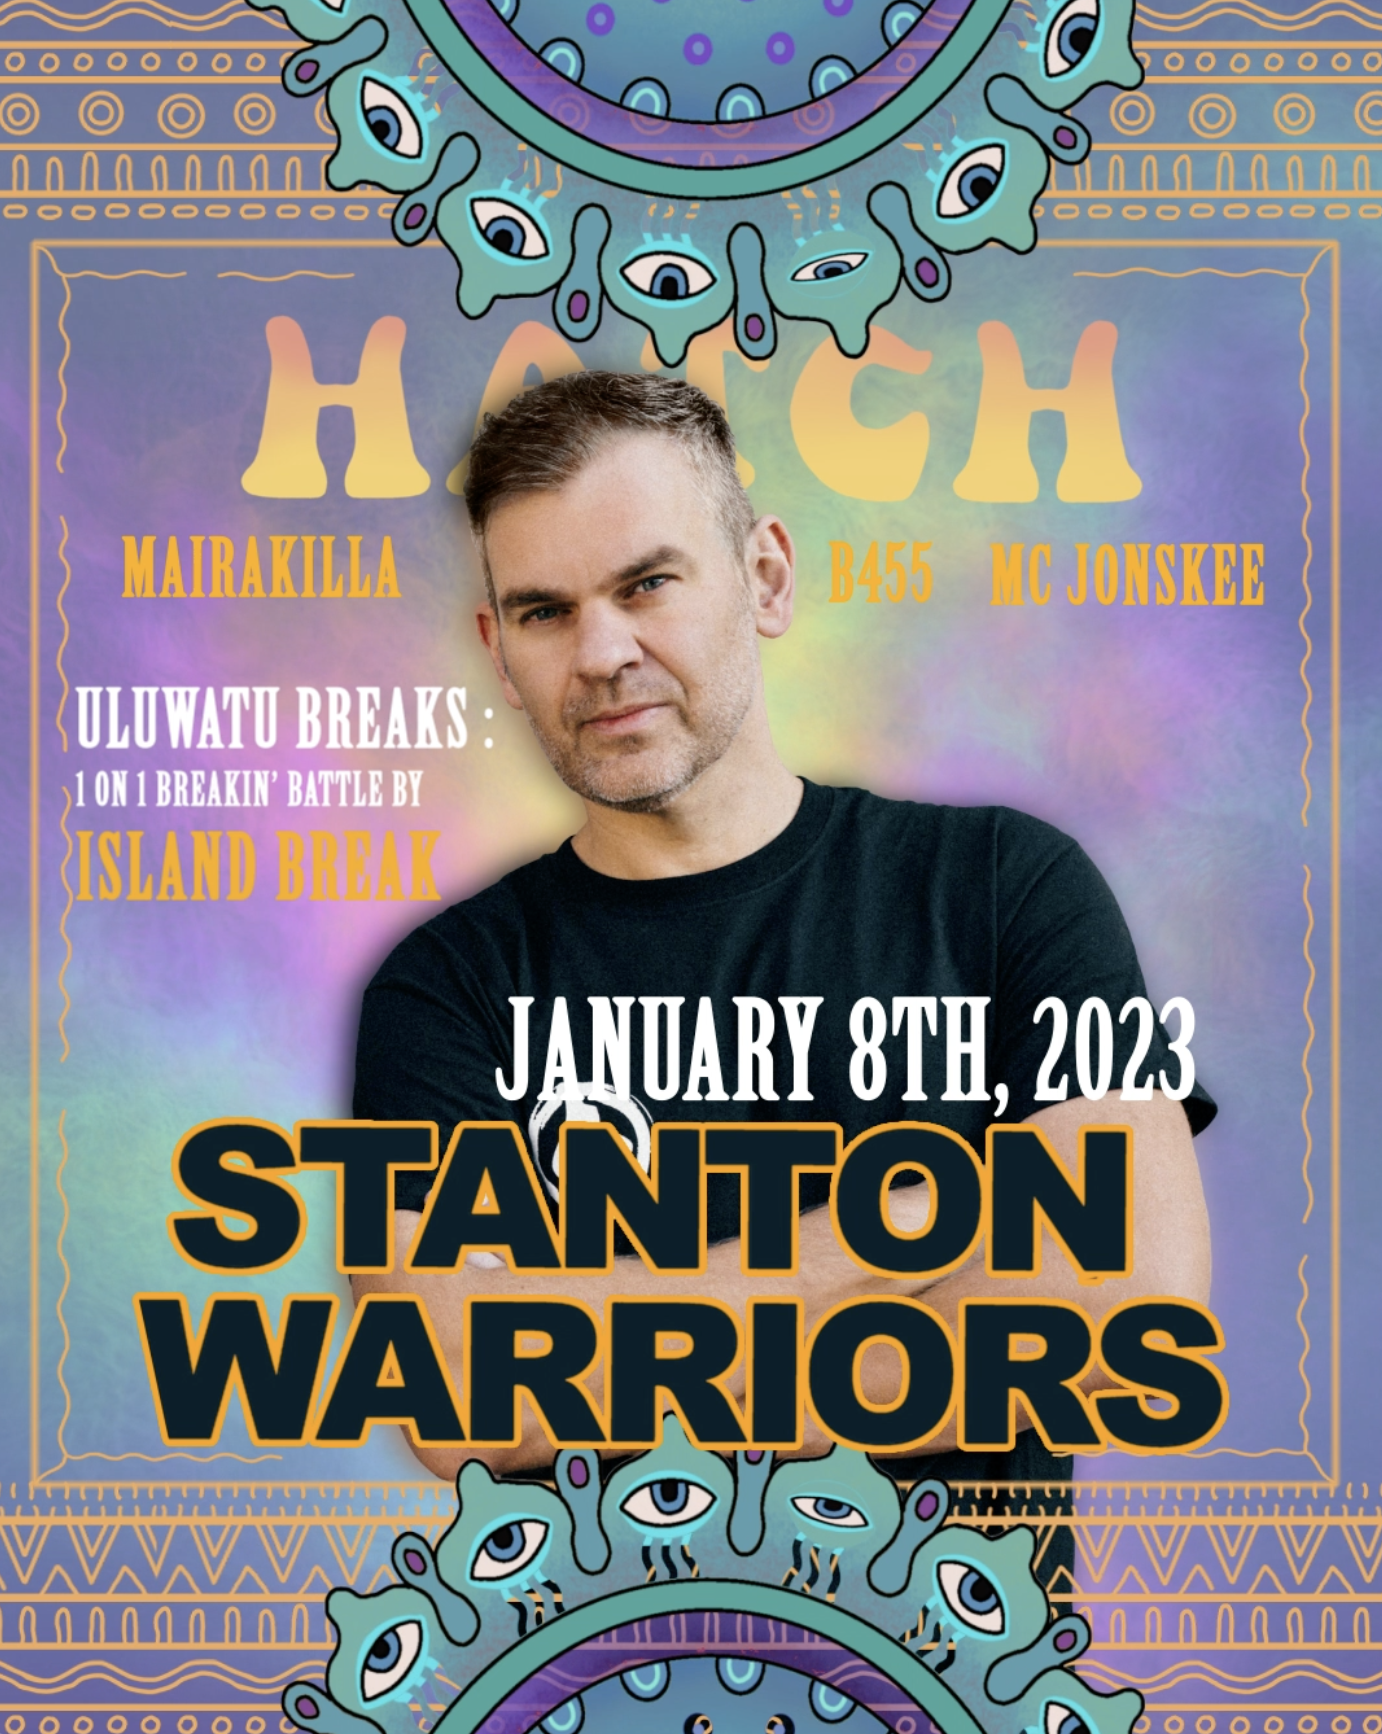 HATCH PRESENTS THE STANTON WARRIORS – SUNDAY JANUARY 8TH thumbnail image